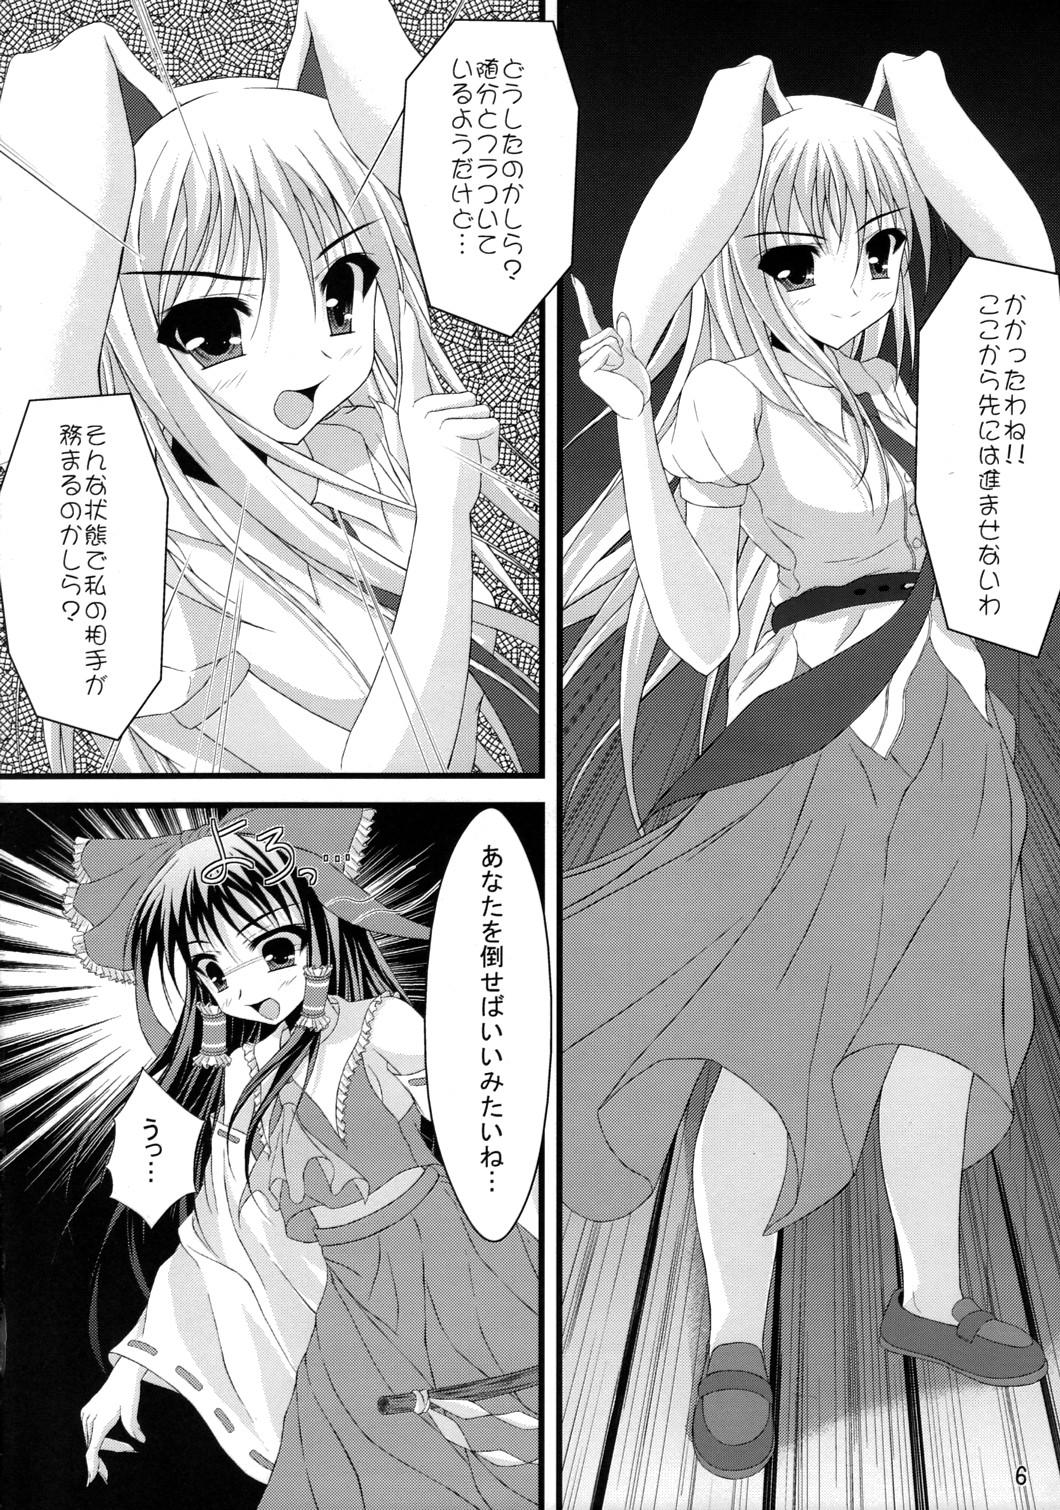 Shoplifter Tele-Mesmerism - Touhou project Groping - Page 5